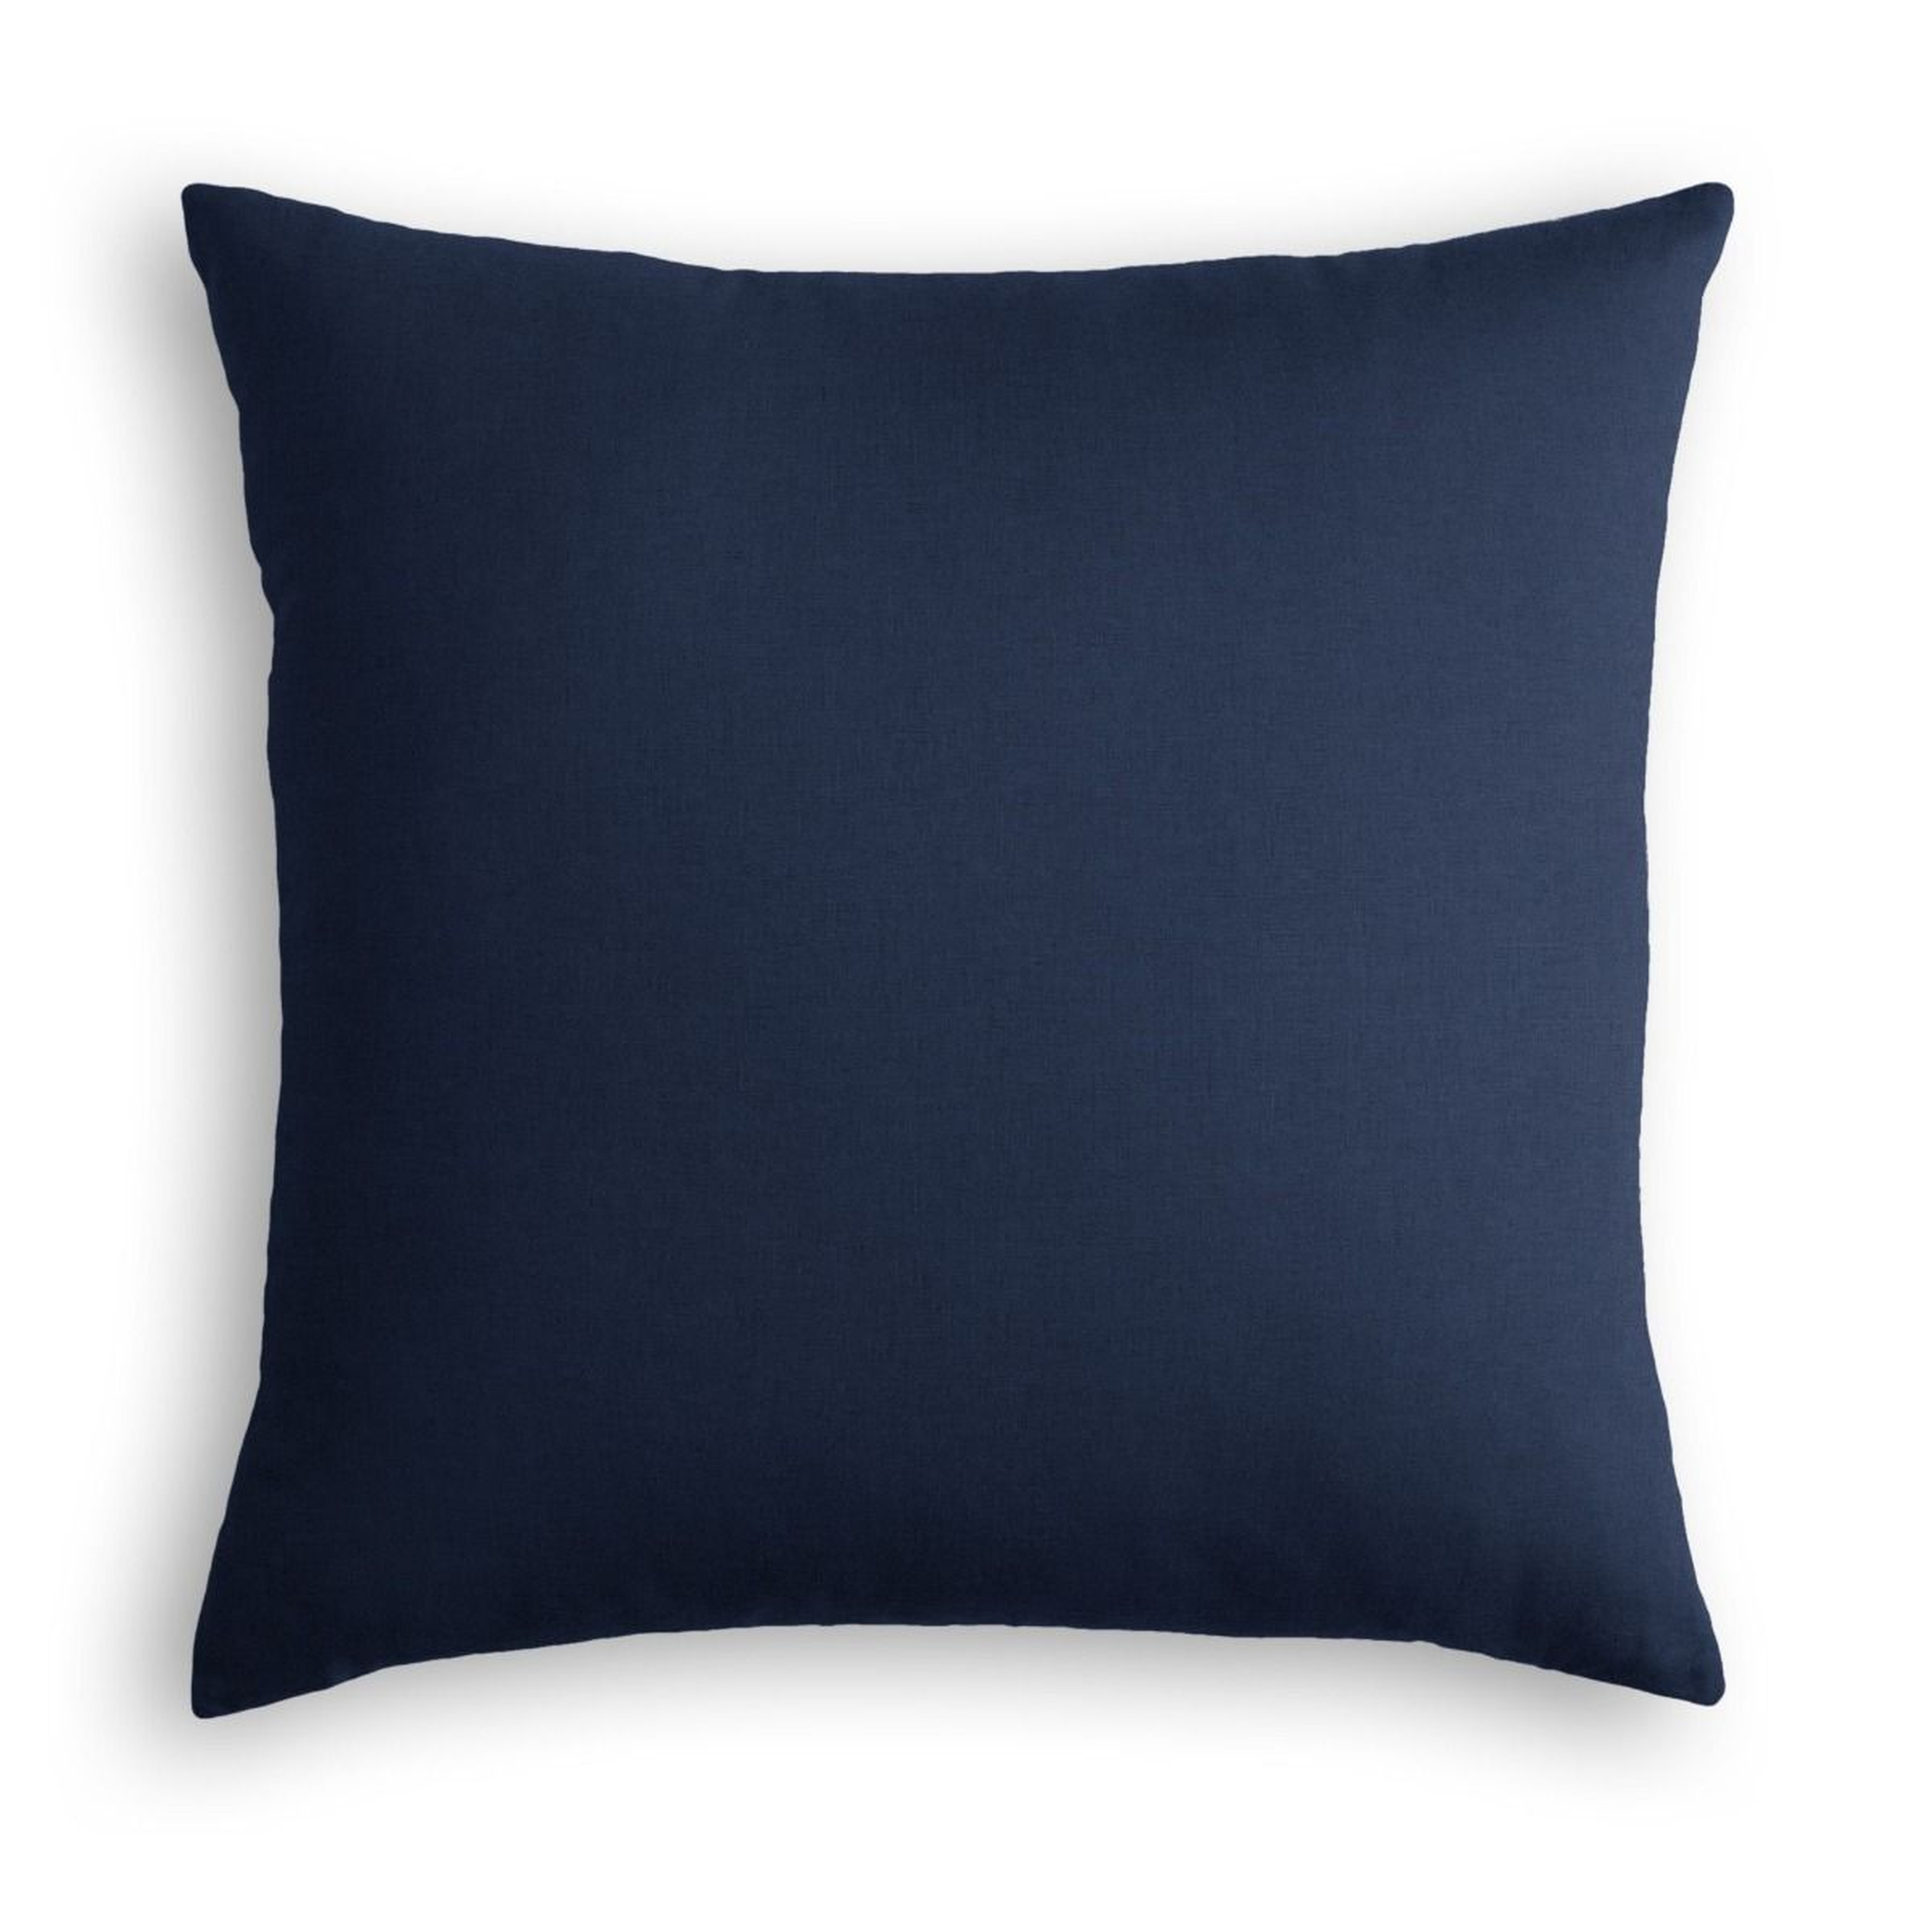 Classic Linen Pillow, Indigo, 22" x 22" with down fill - Havenly Essentials